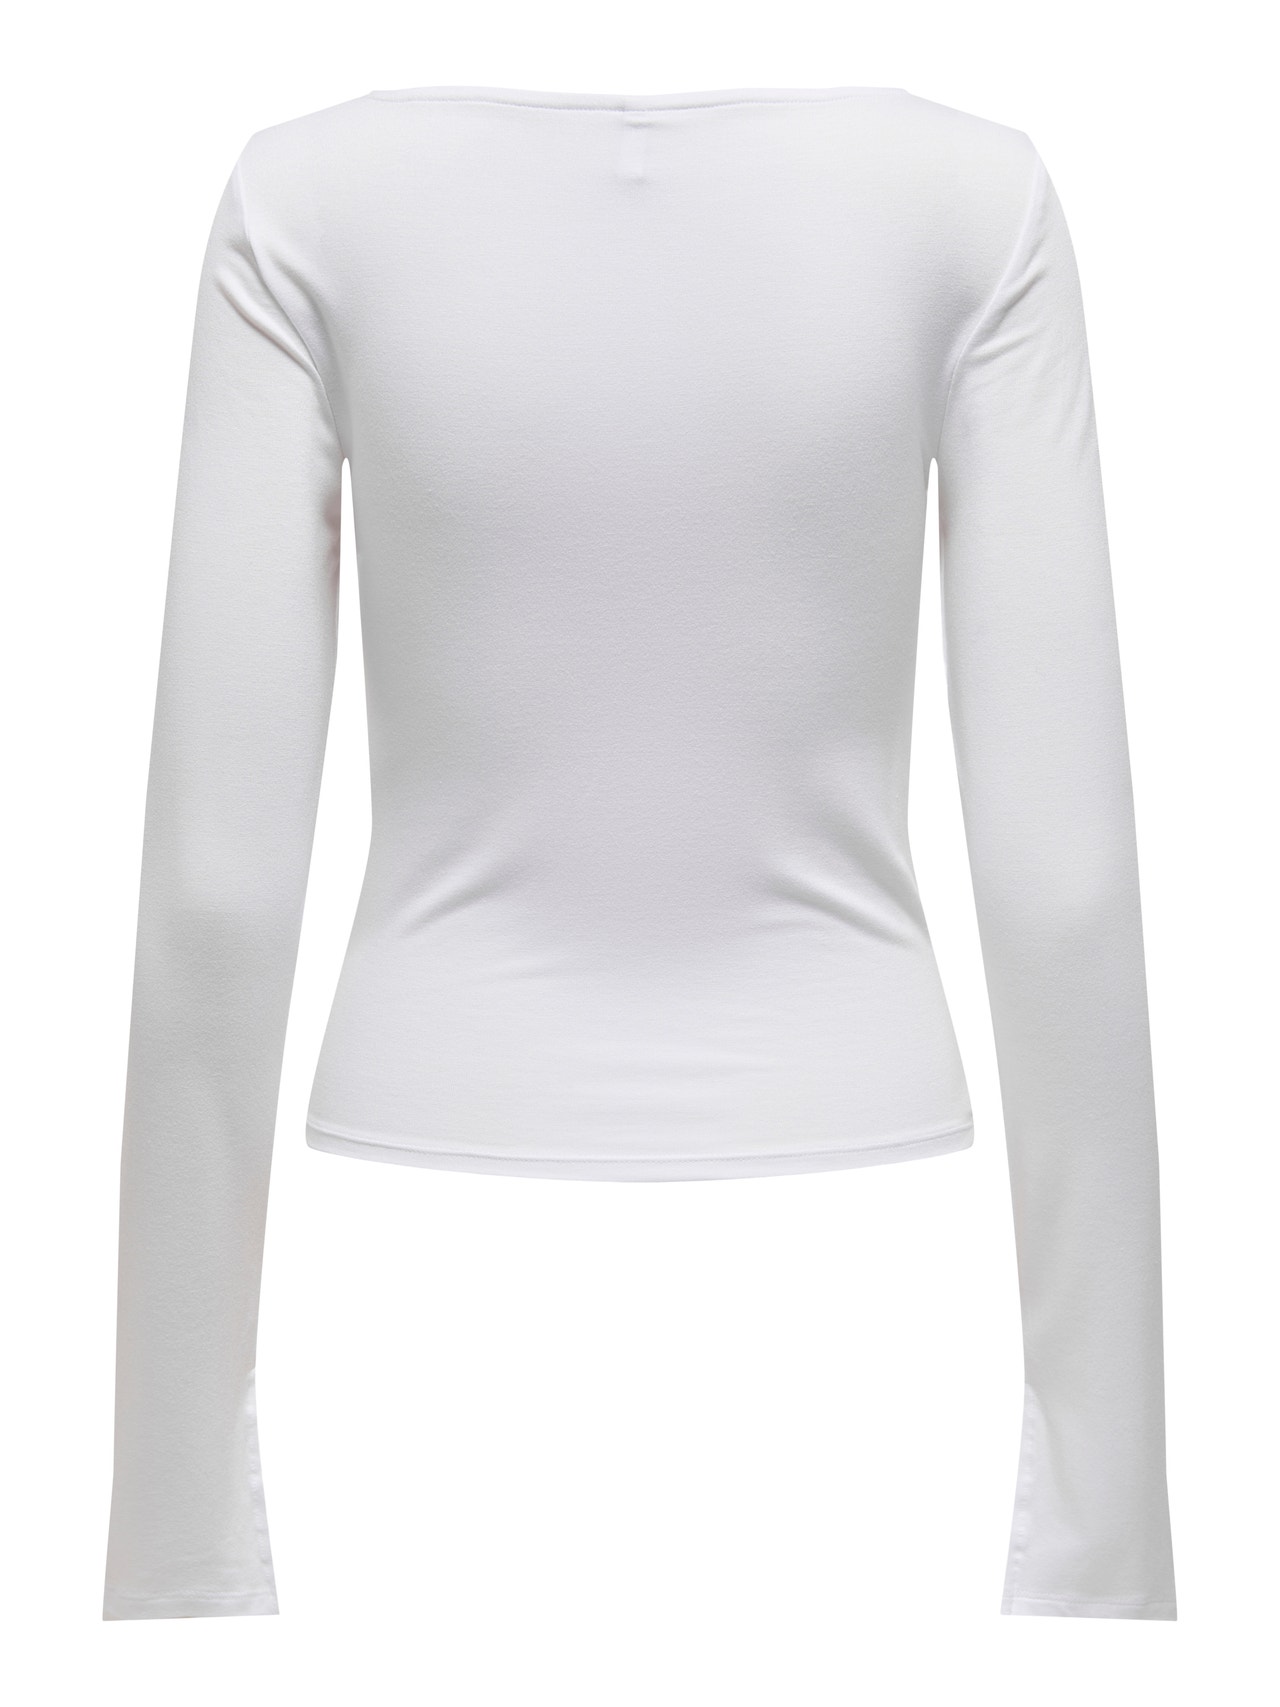 ONLY Top with boat neck -White - 15336321